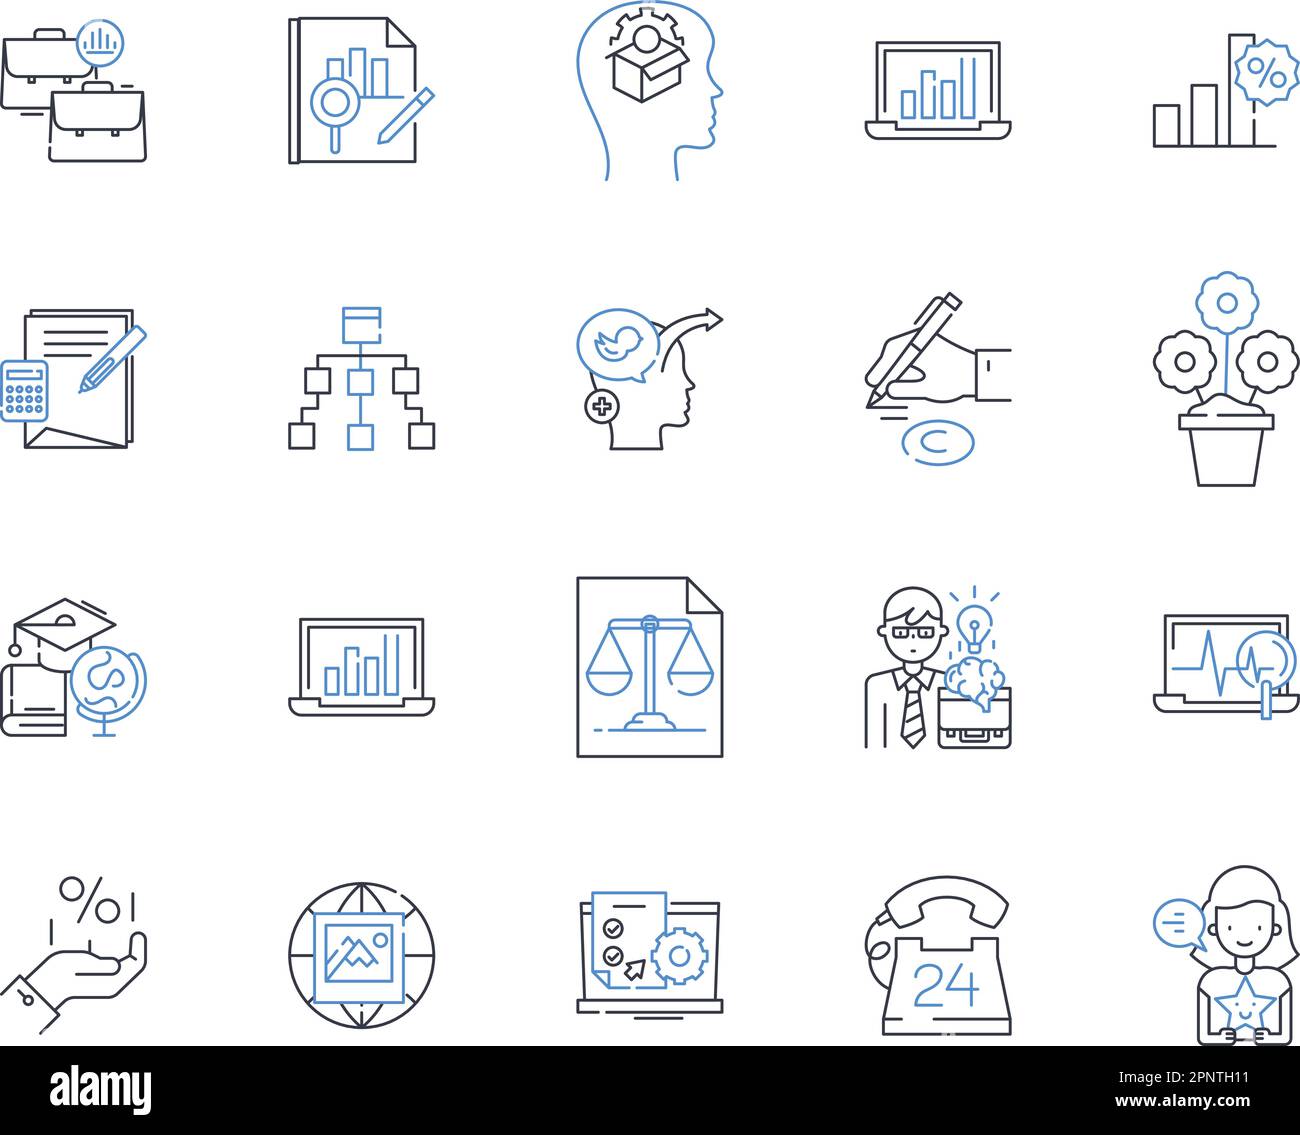 Risk Assessment line icons collection. Probability, Hazards, Vulnerability, Exposure, Mitigation, Consequence, Impact vector and linear illustration Stock Vector